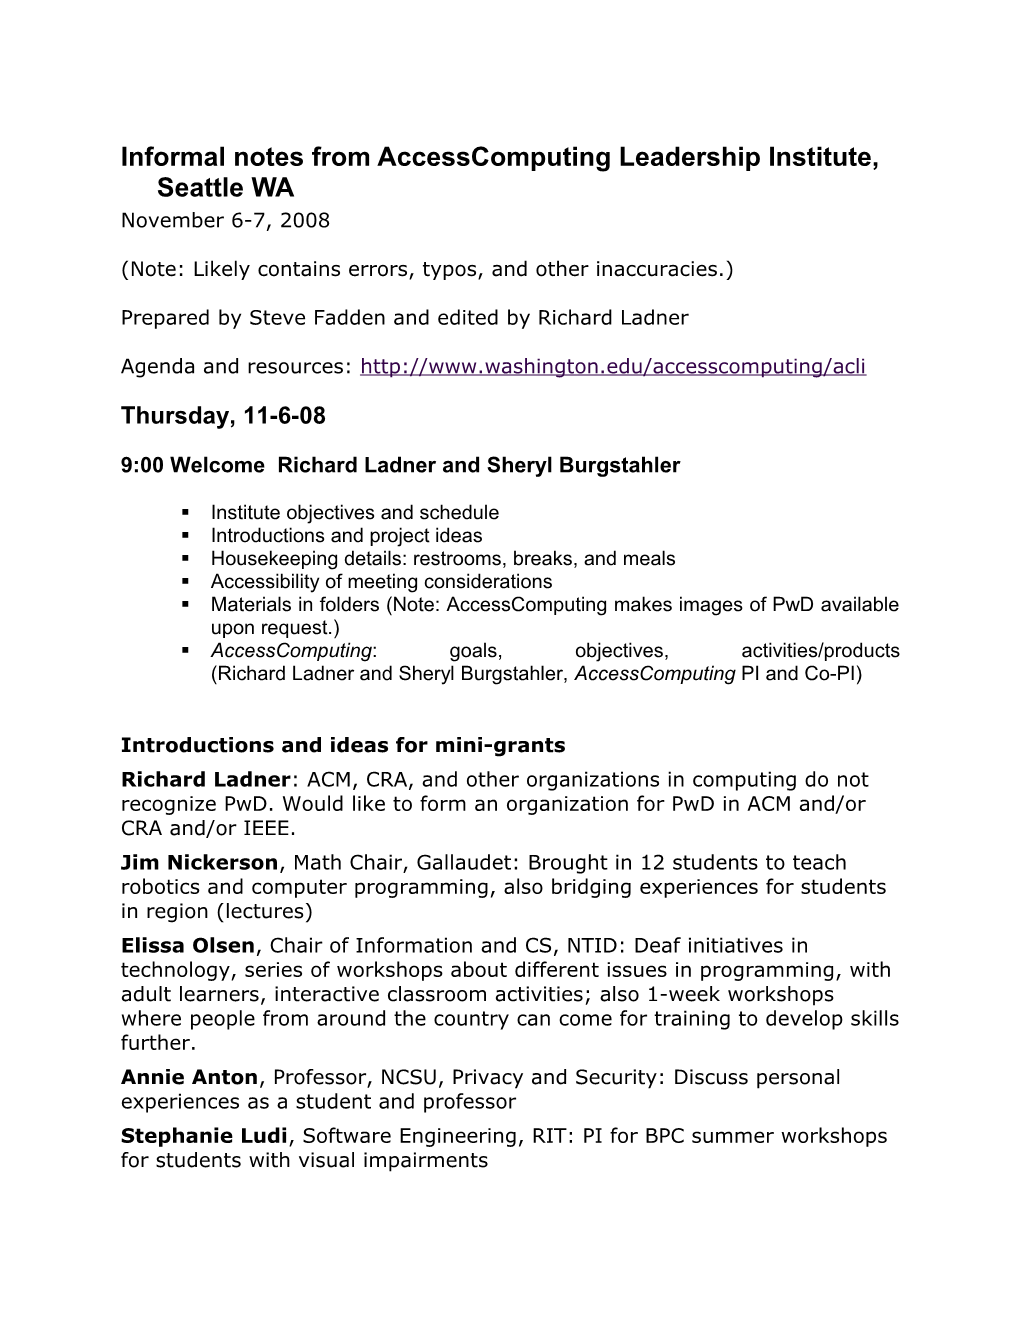 Informal Notes from Accesscomputing Leadership Institute, Seattle WA